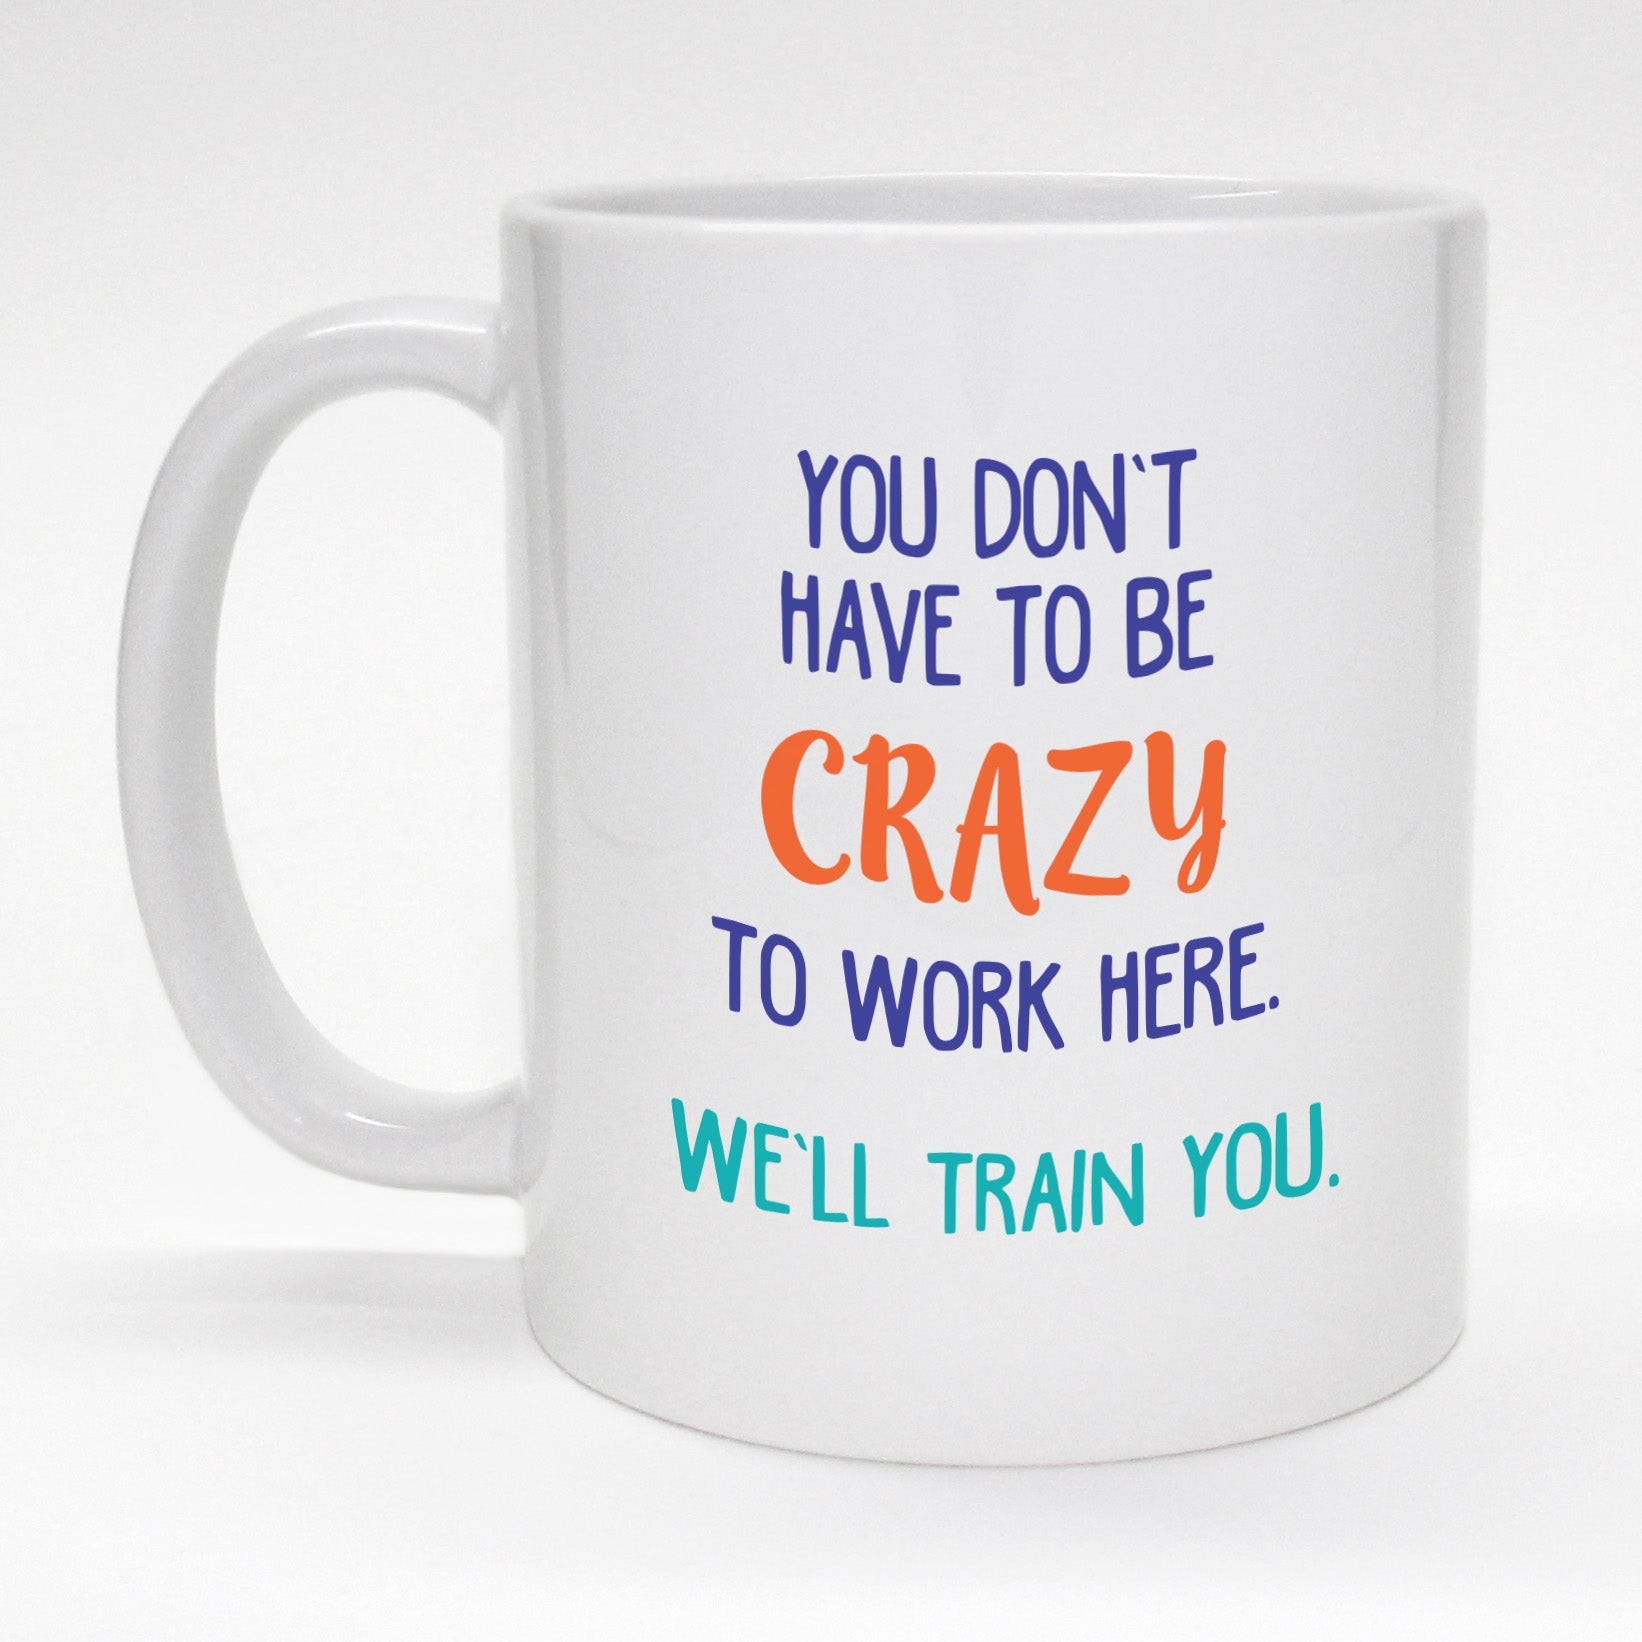 I Will Probably Spill This Coffee Mug - Funny Coffee Mugs - Gifts